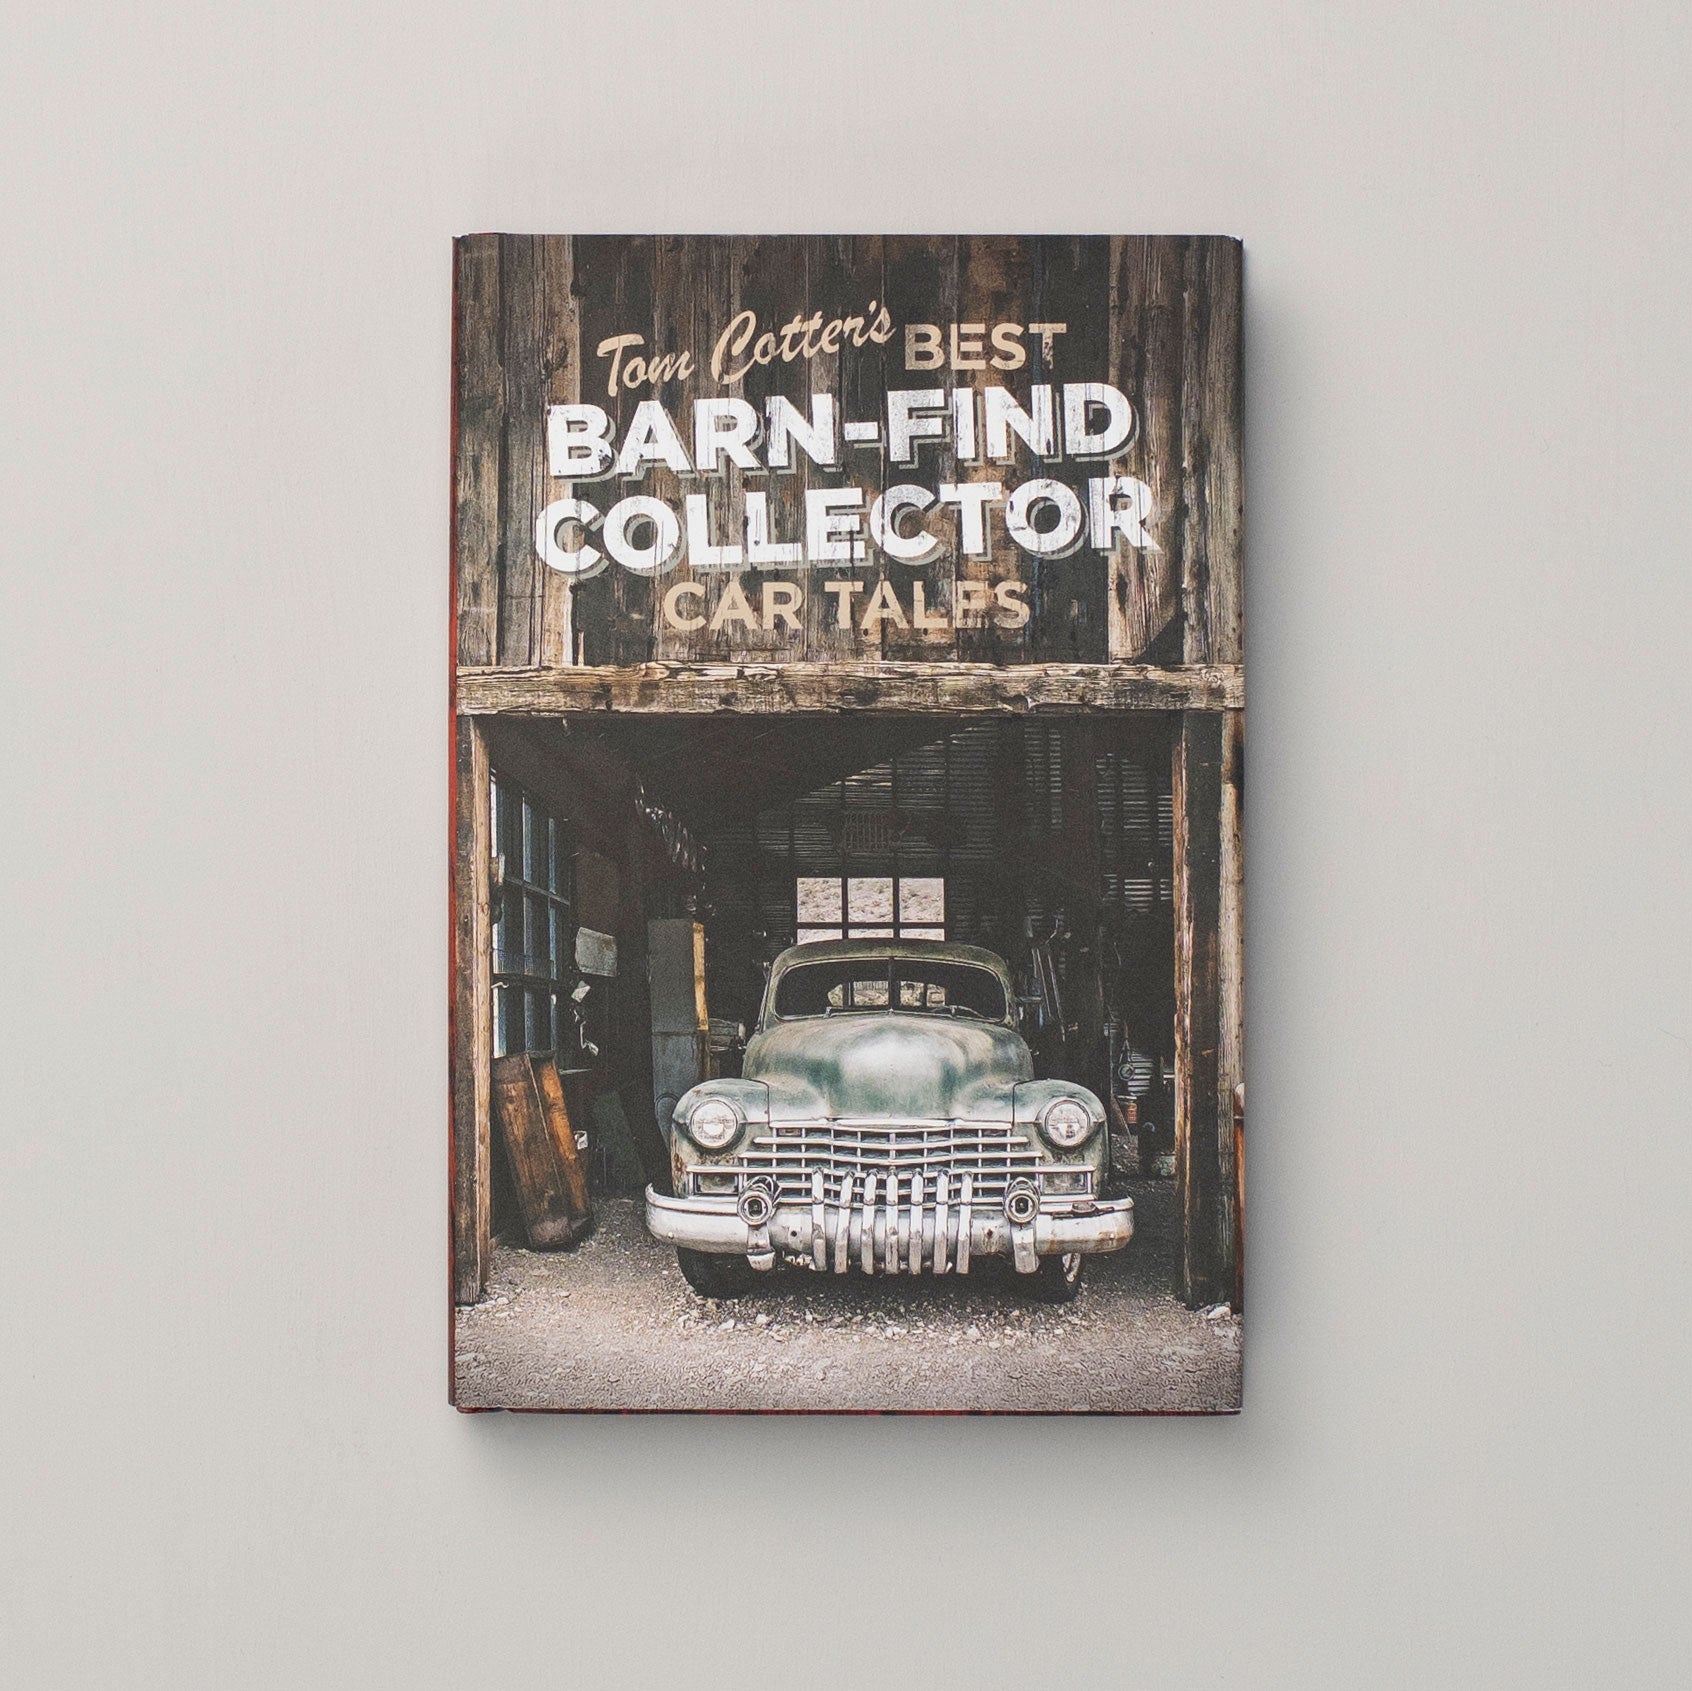 Tom Cotters Best Barn-Find Collector Car Tales